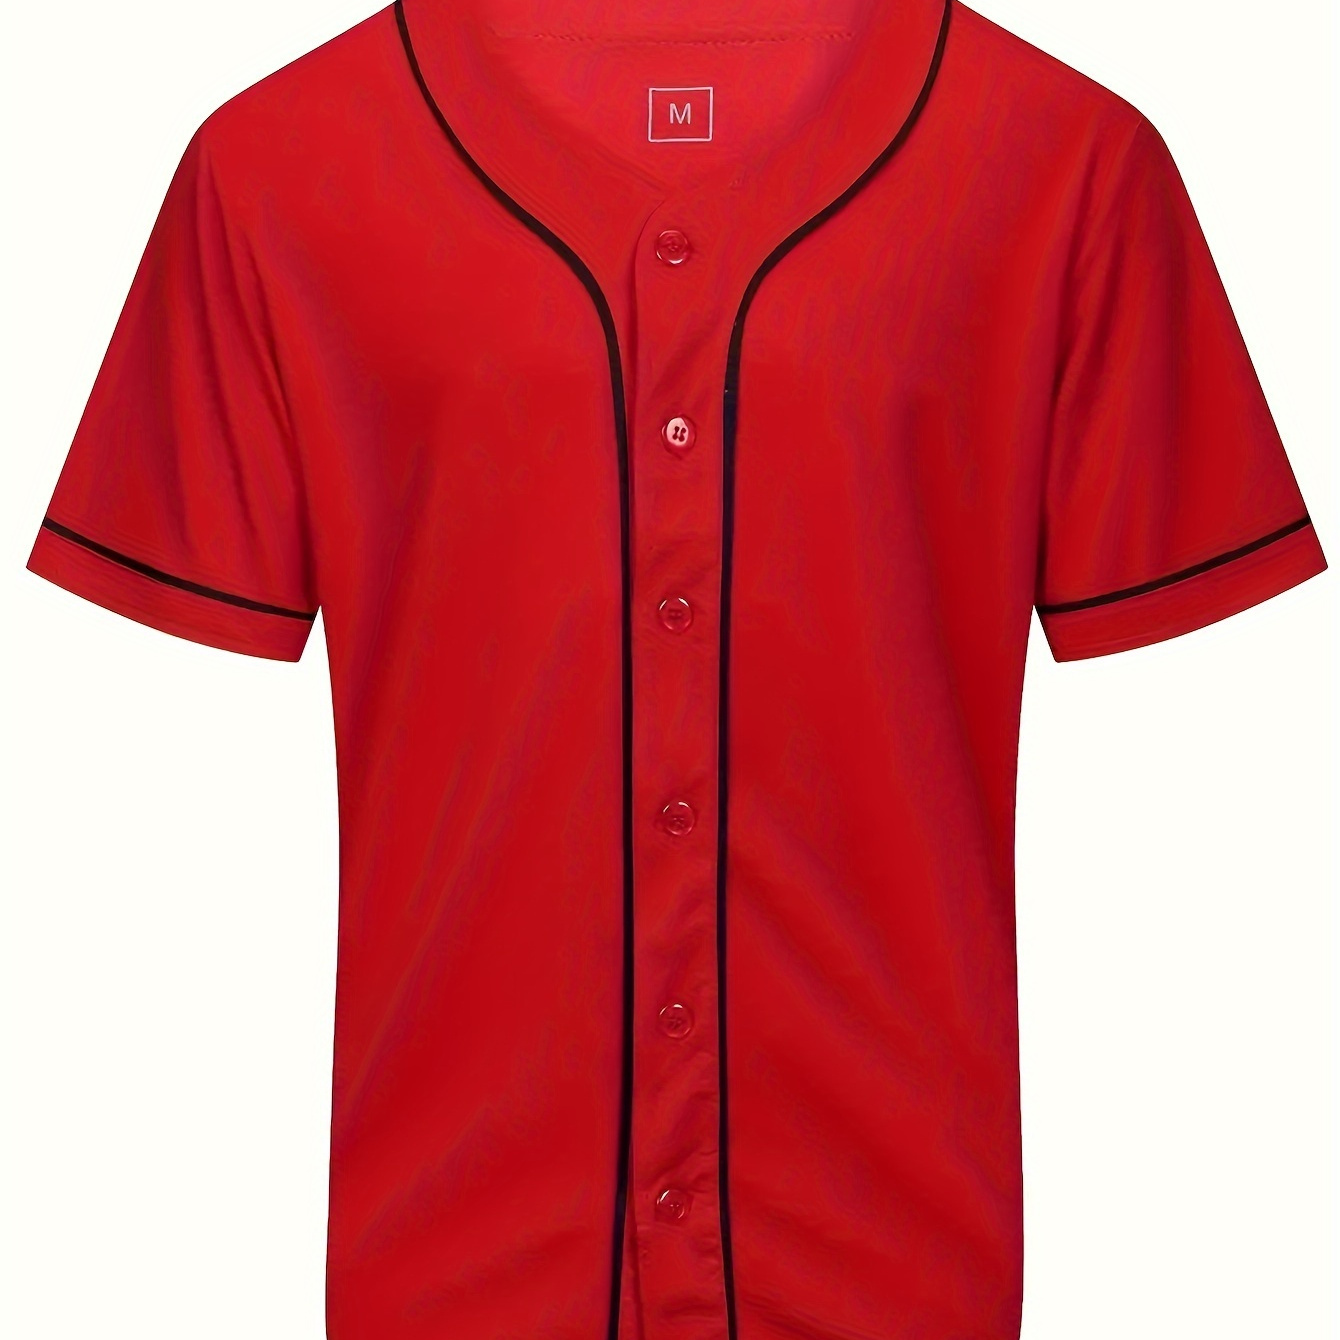 

Casual Breathable Men's Classic Design Short Sleeve V-neck Button Up Baseball Jersey For Training, Matches, Parties, Summer Clothing